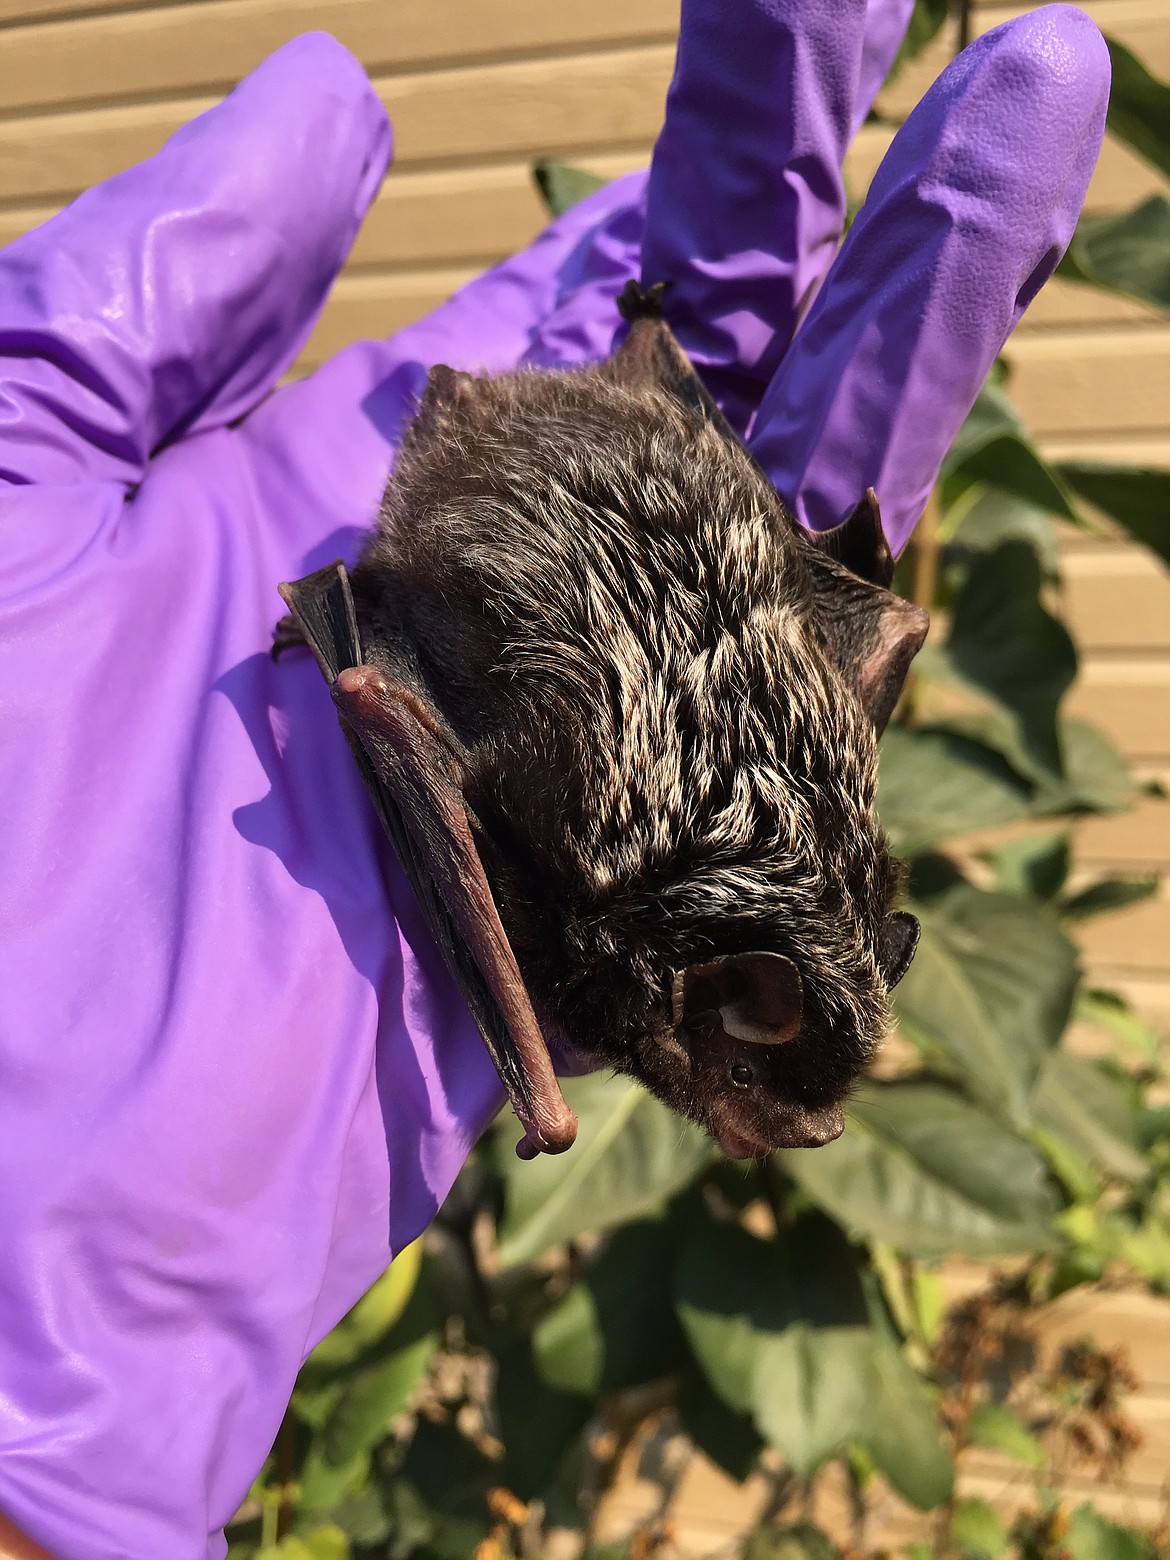 Silver-haired bat in the hand. Dixon says Idaho’s bats are much smaller than people think, small enough to fit in a first-class envelope.